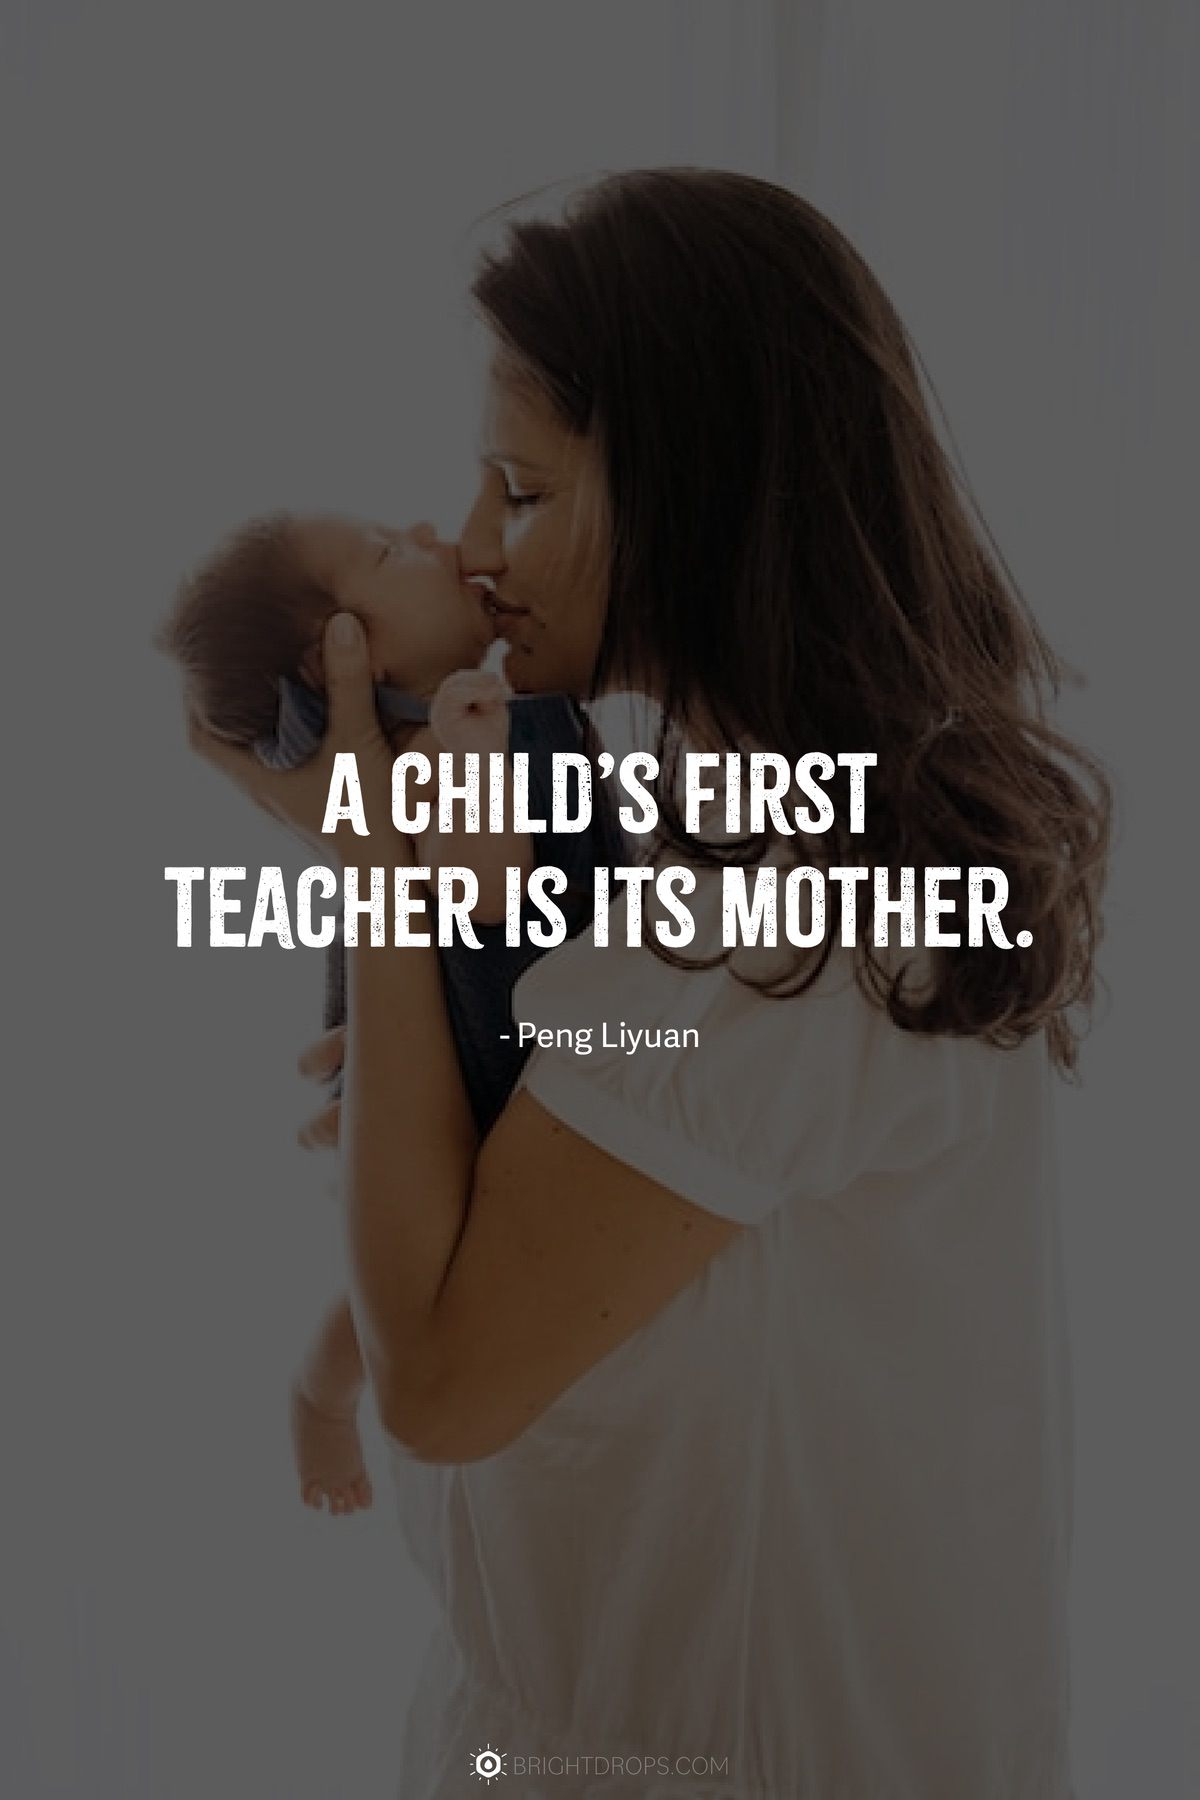 A child’s first teacher is its mother.